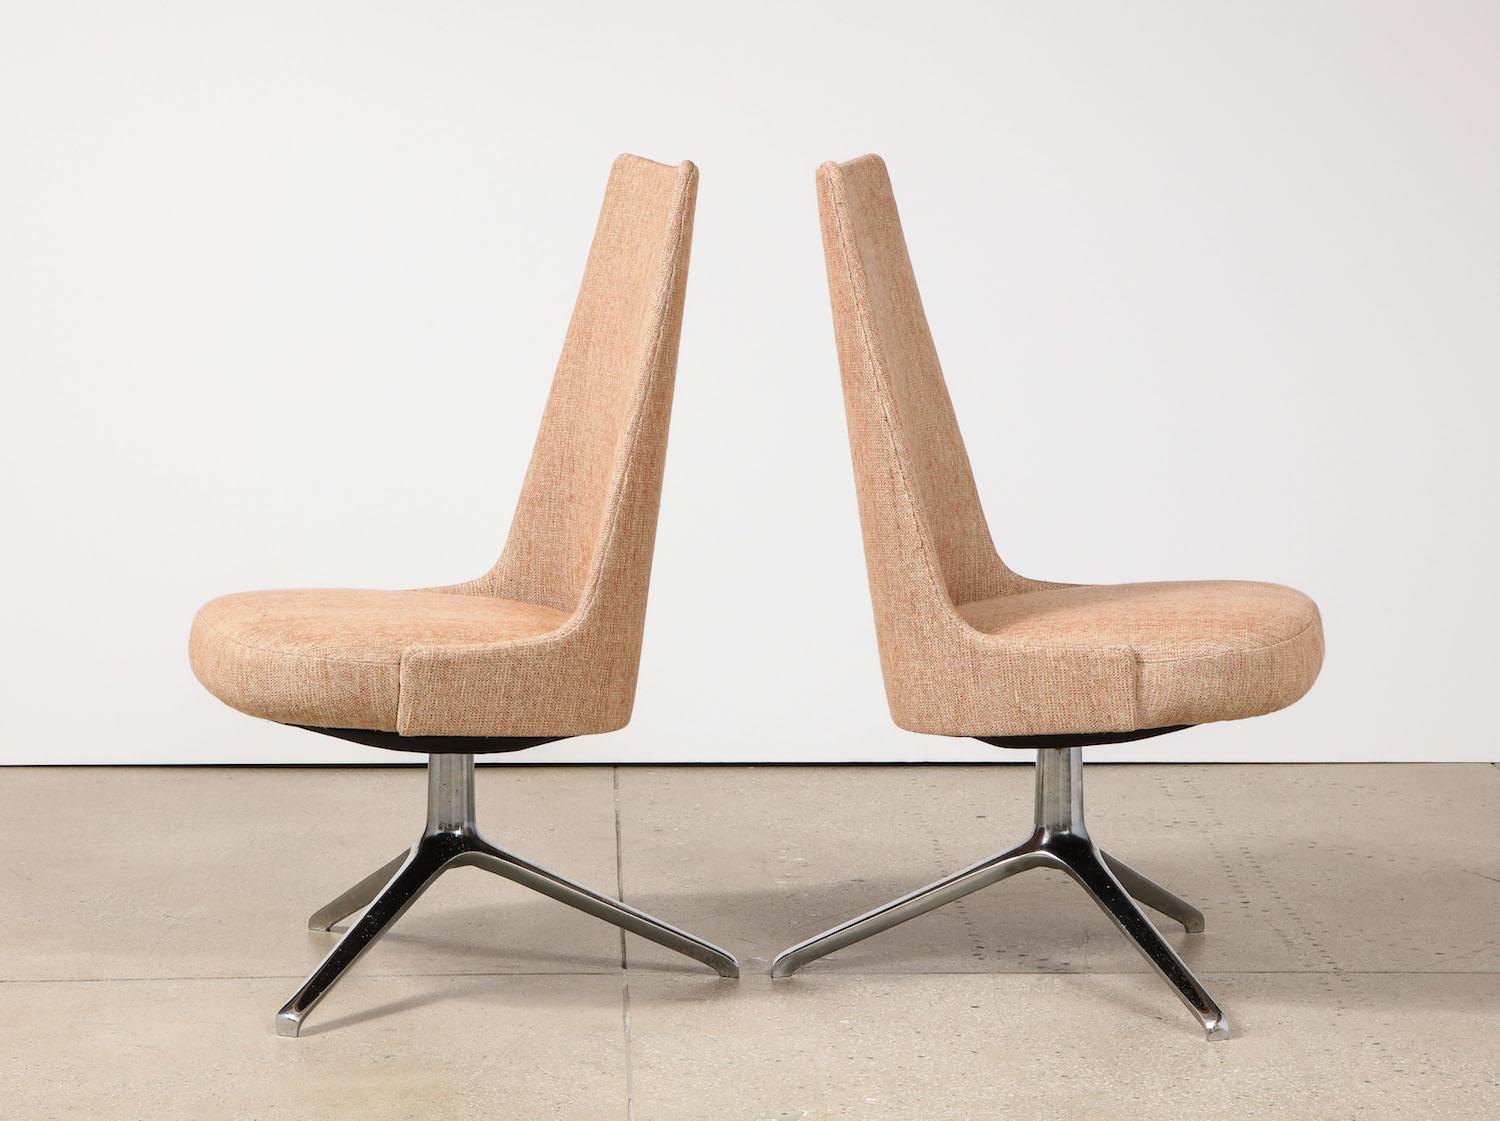 Polished aluminum, steel, fabric. Rare set of custom dining/ desk chairs designed by father & daughter and
Produced by ABV. Sleek upholstered seats supported by tri-legged swivel bases. These chairs were originally
Design for a project in Palm